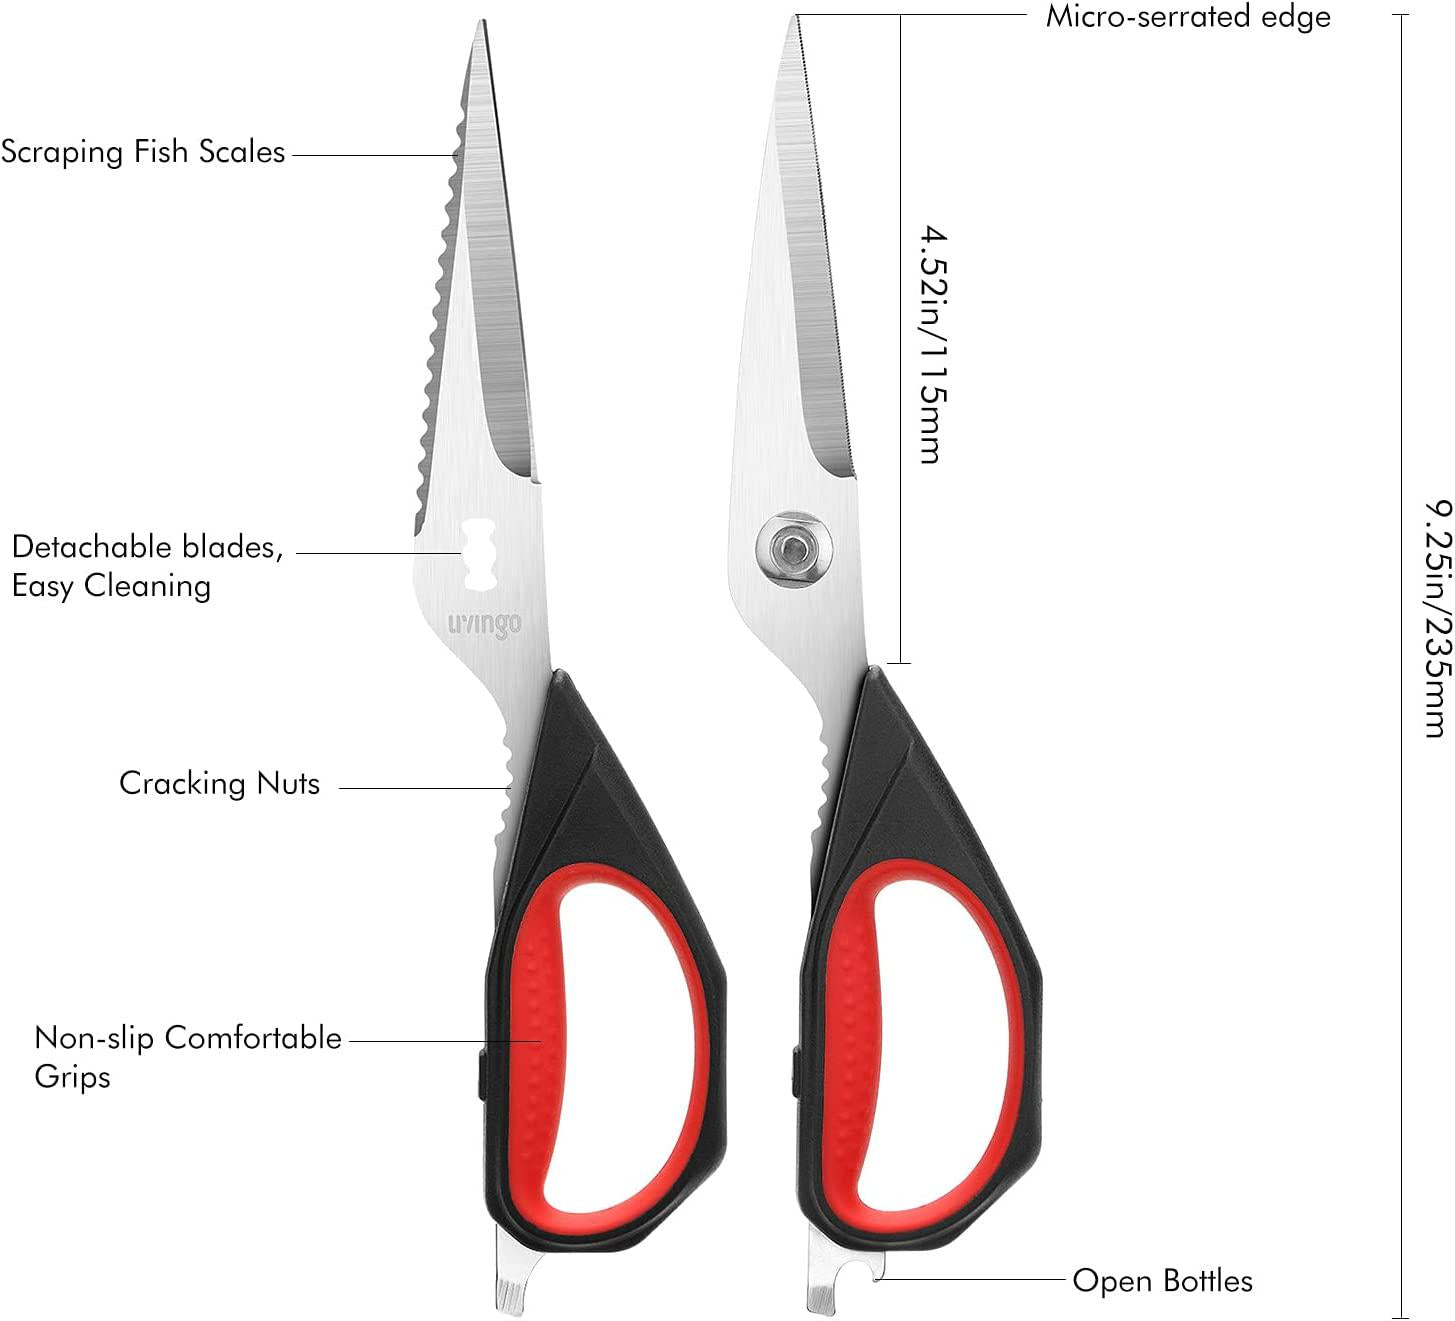 LIVINGO, LIVINGO Kitchen Scissors, 2 Pack 9.25 Utility All Purpose Poultry Shears Heavy Duty Dishwasher Safe, Come Apart Sharp Stainless Steel Cooking Food Scissors for Cutting Meat, Chicken, Vegetable, Fish